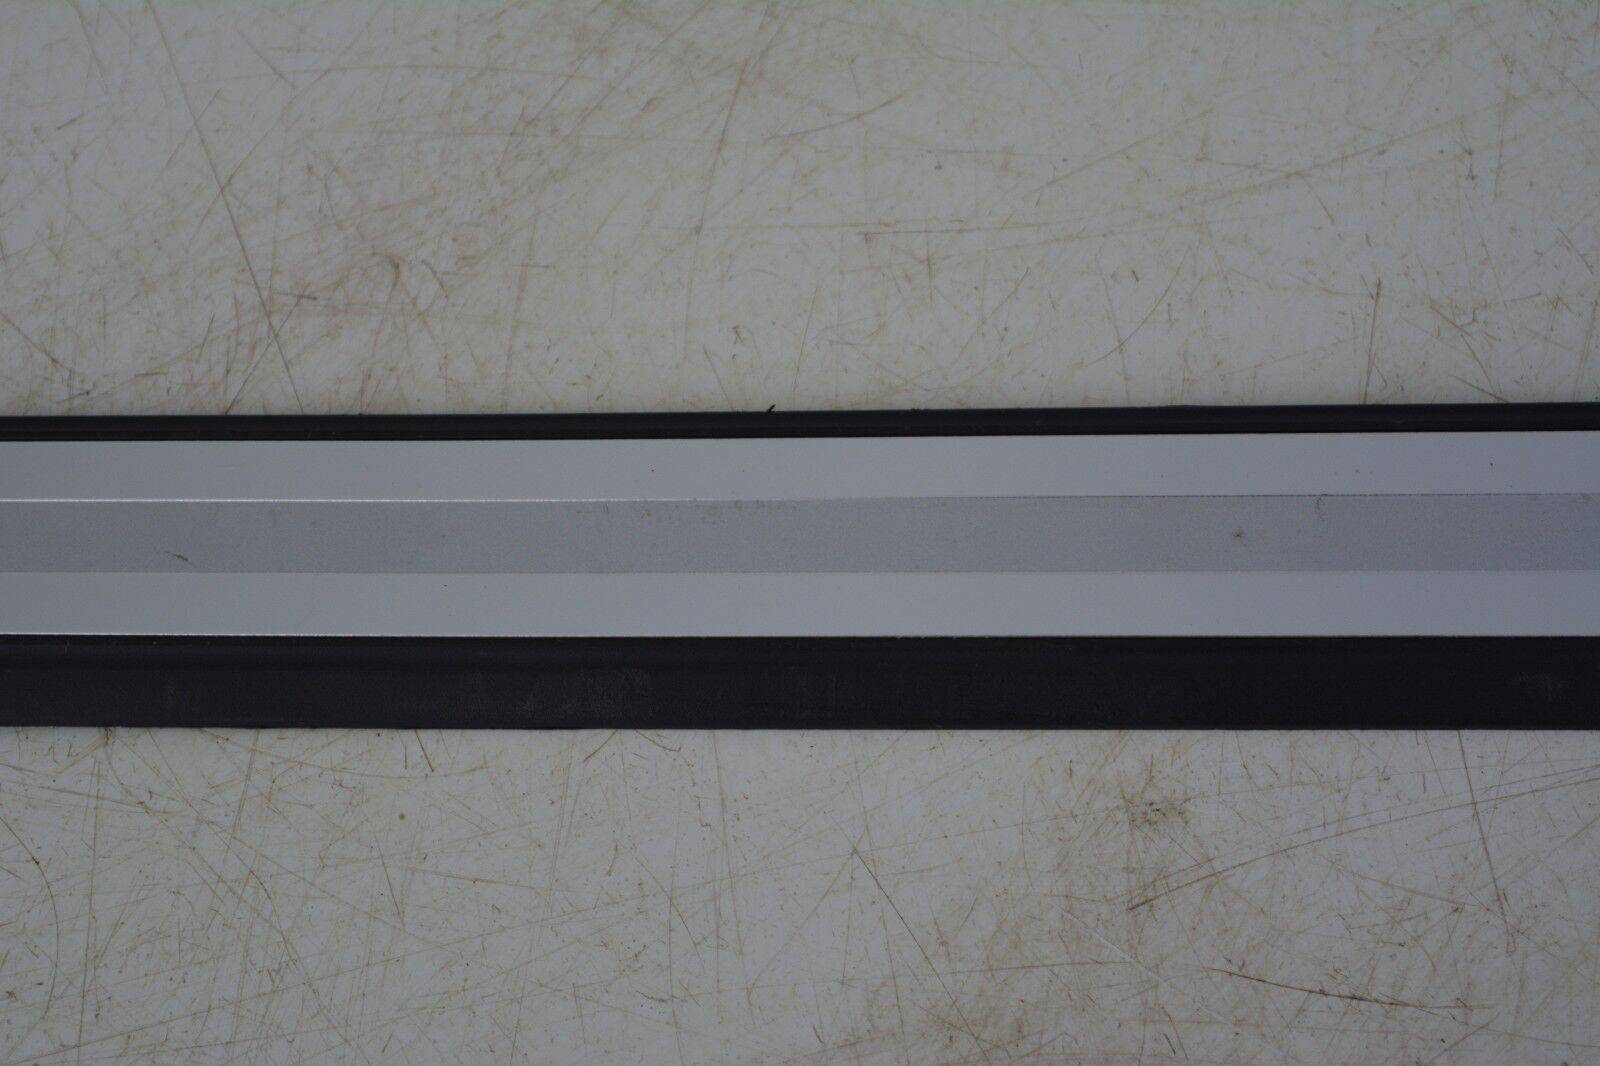 Audi-A4-Door-Sill-Entry-Trim-Front-Left-8W0853373F-Genuine-176469540383-4